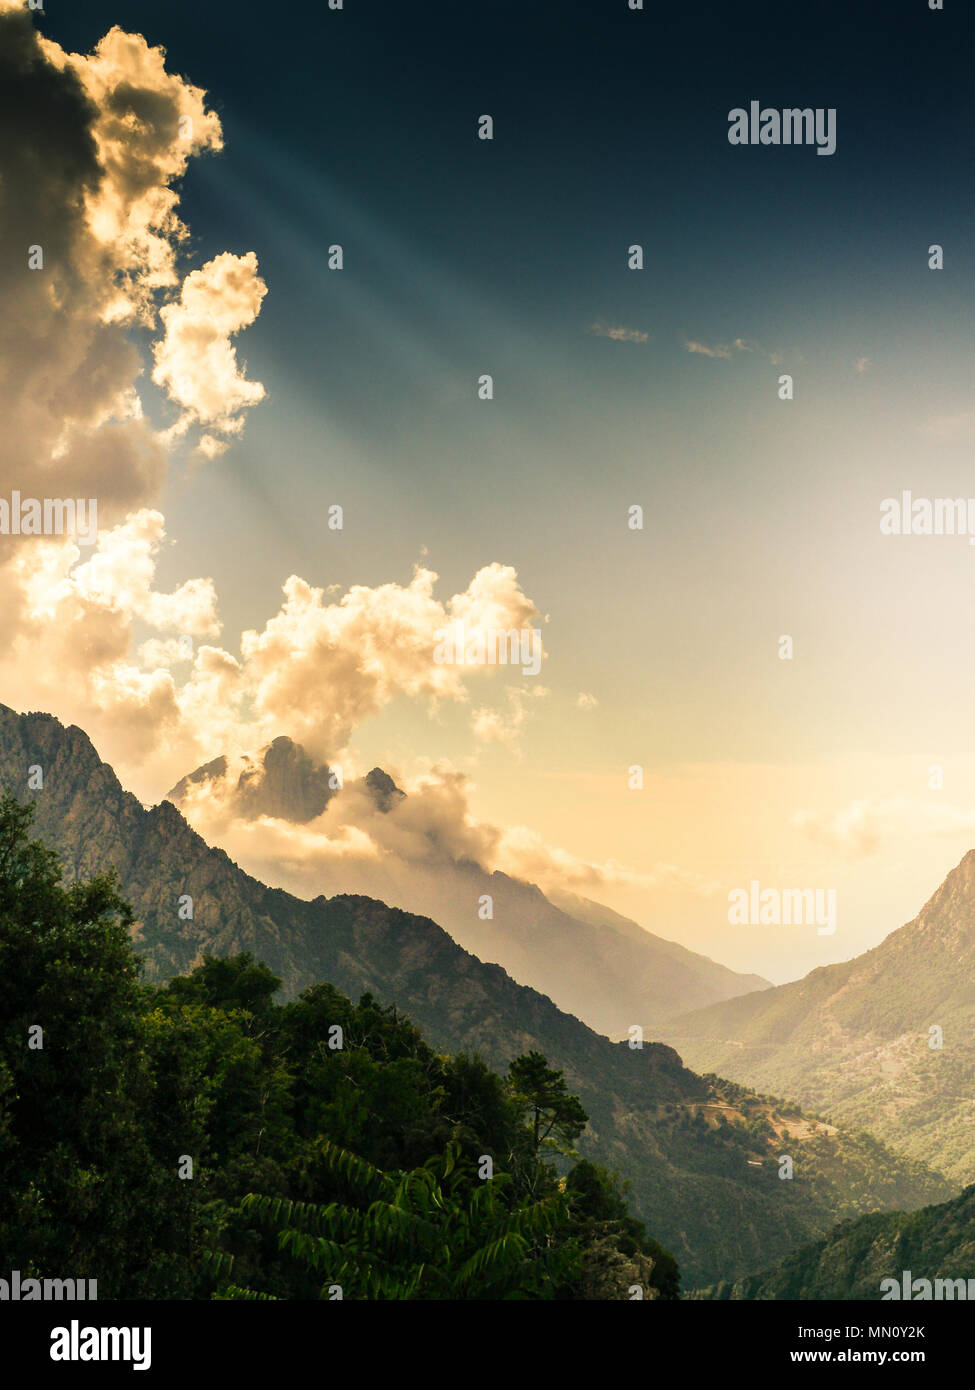 Mountainpeak surrounded by clouds and godrays with trees in the foreground on corsica. Misty sky Stock Photo